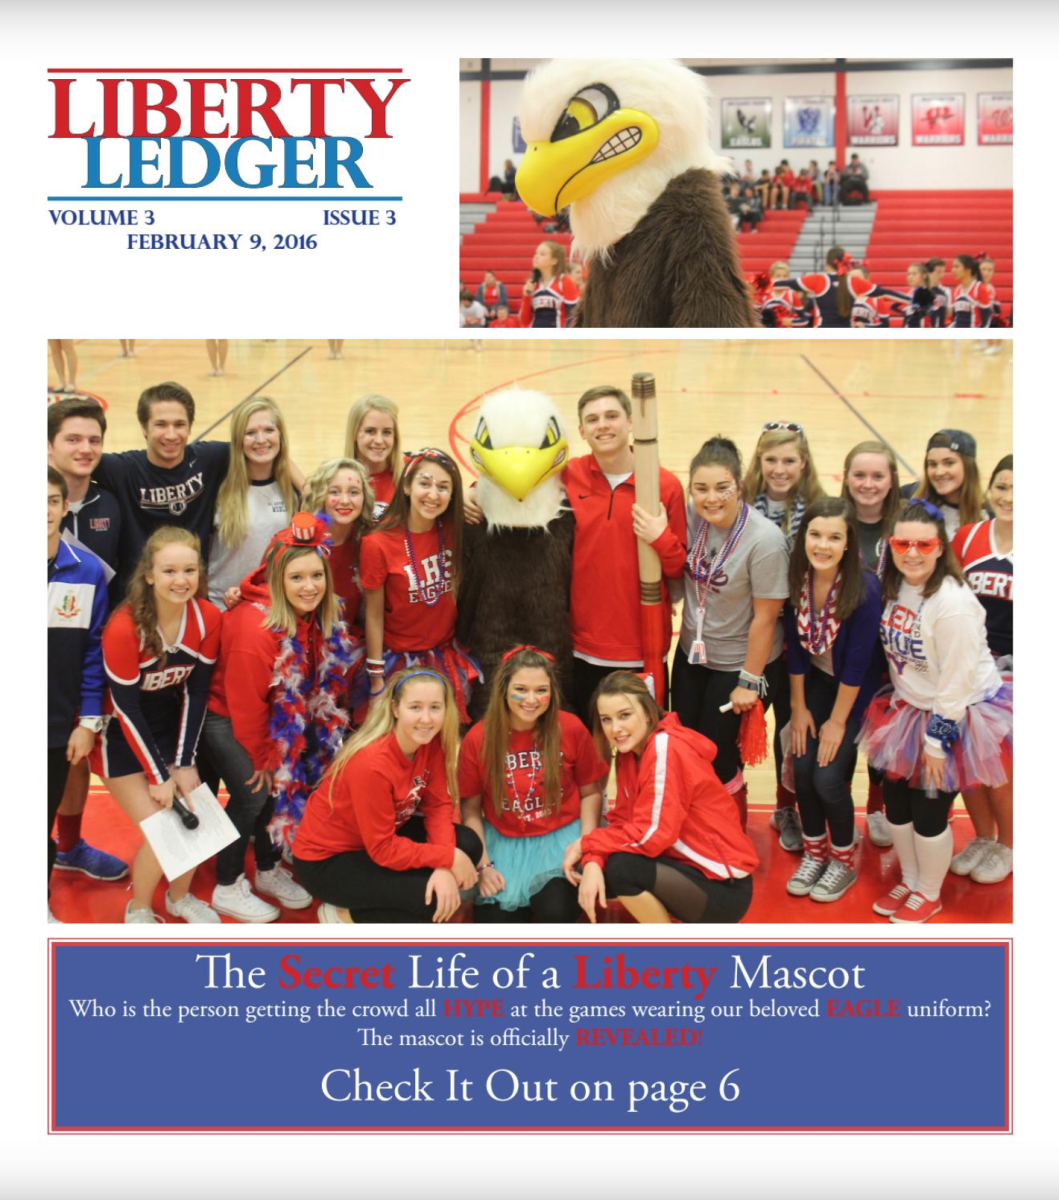 The Ledger Volume 3 Issue 3: The Secret Life of a Liberty Mascot